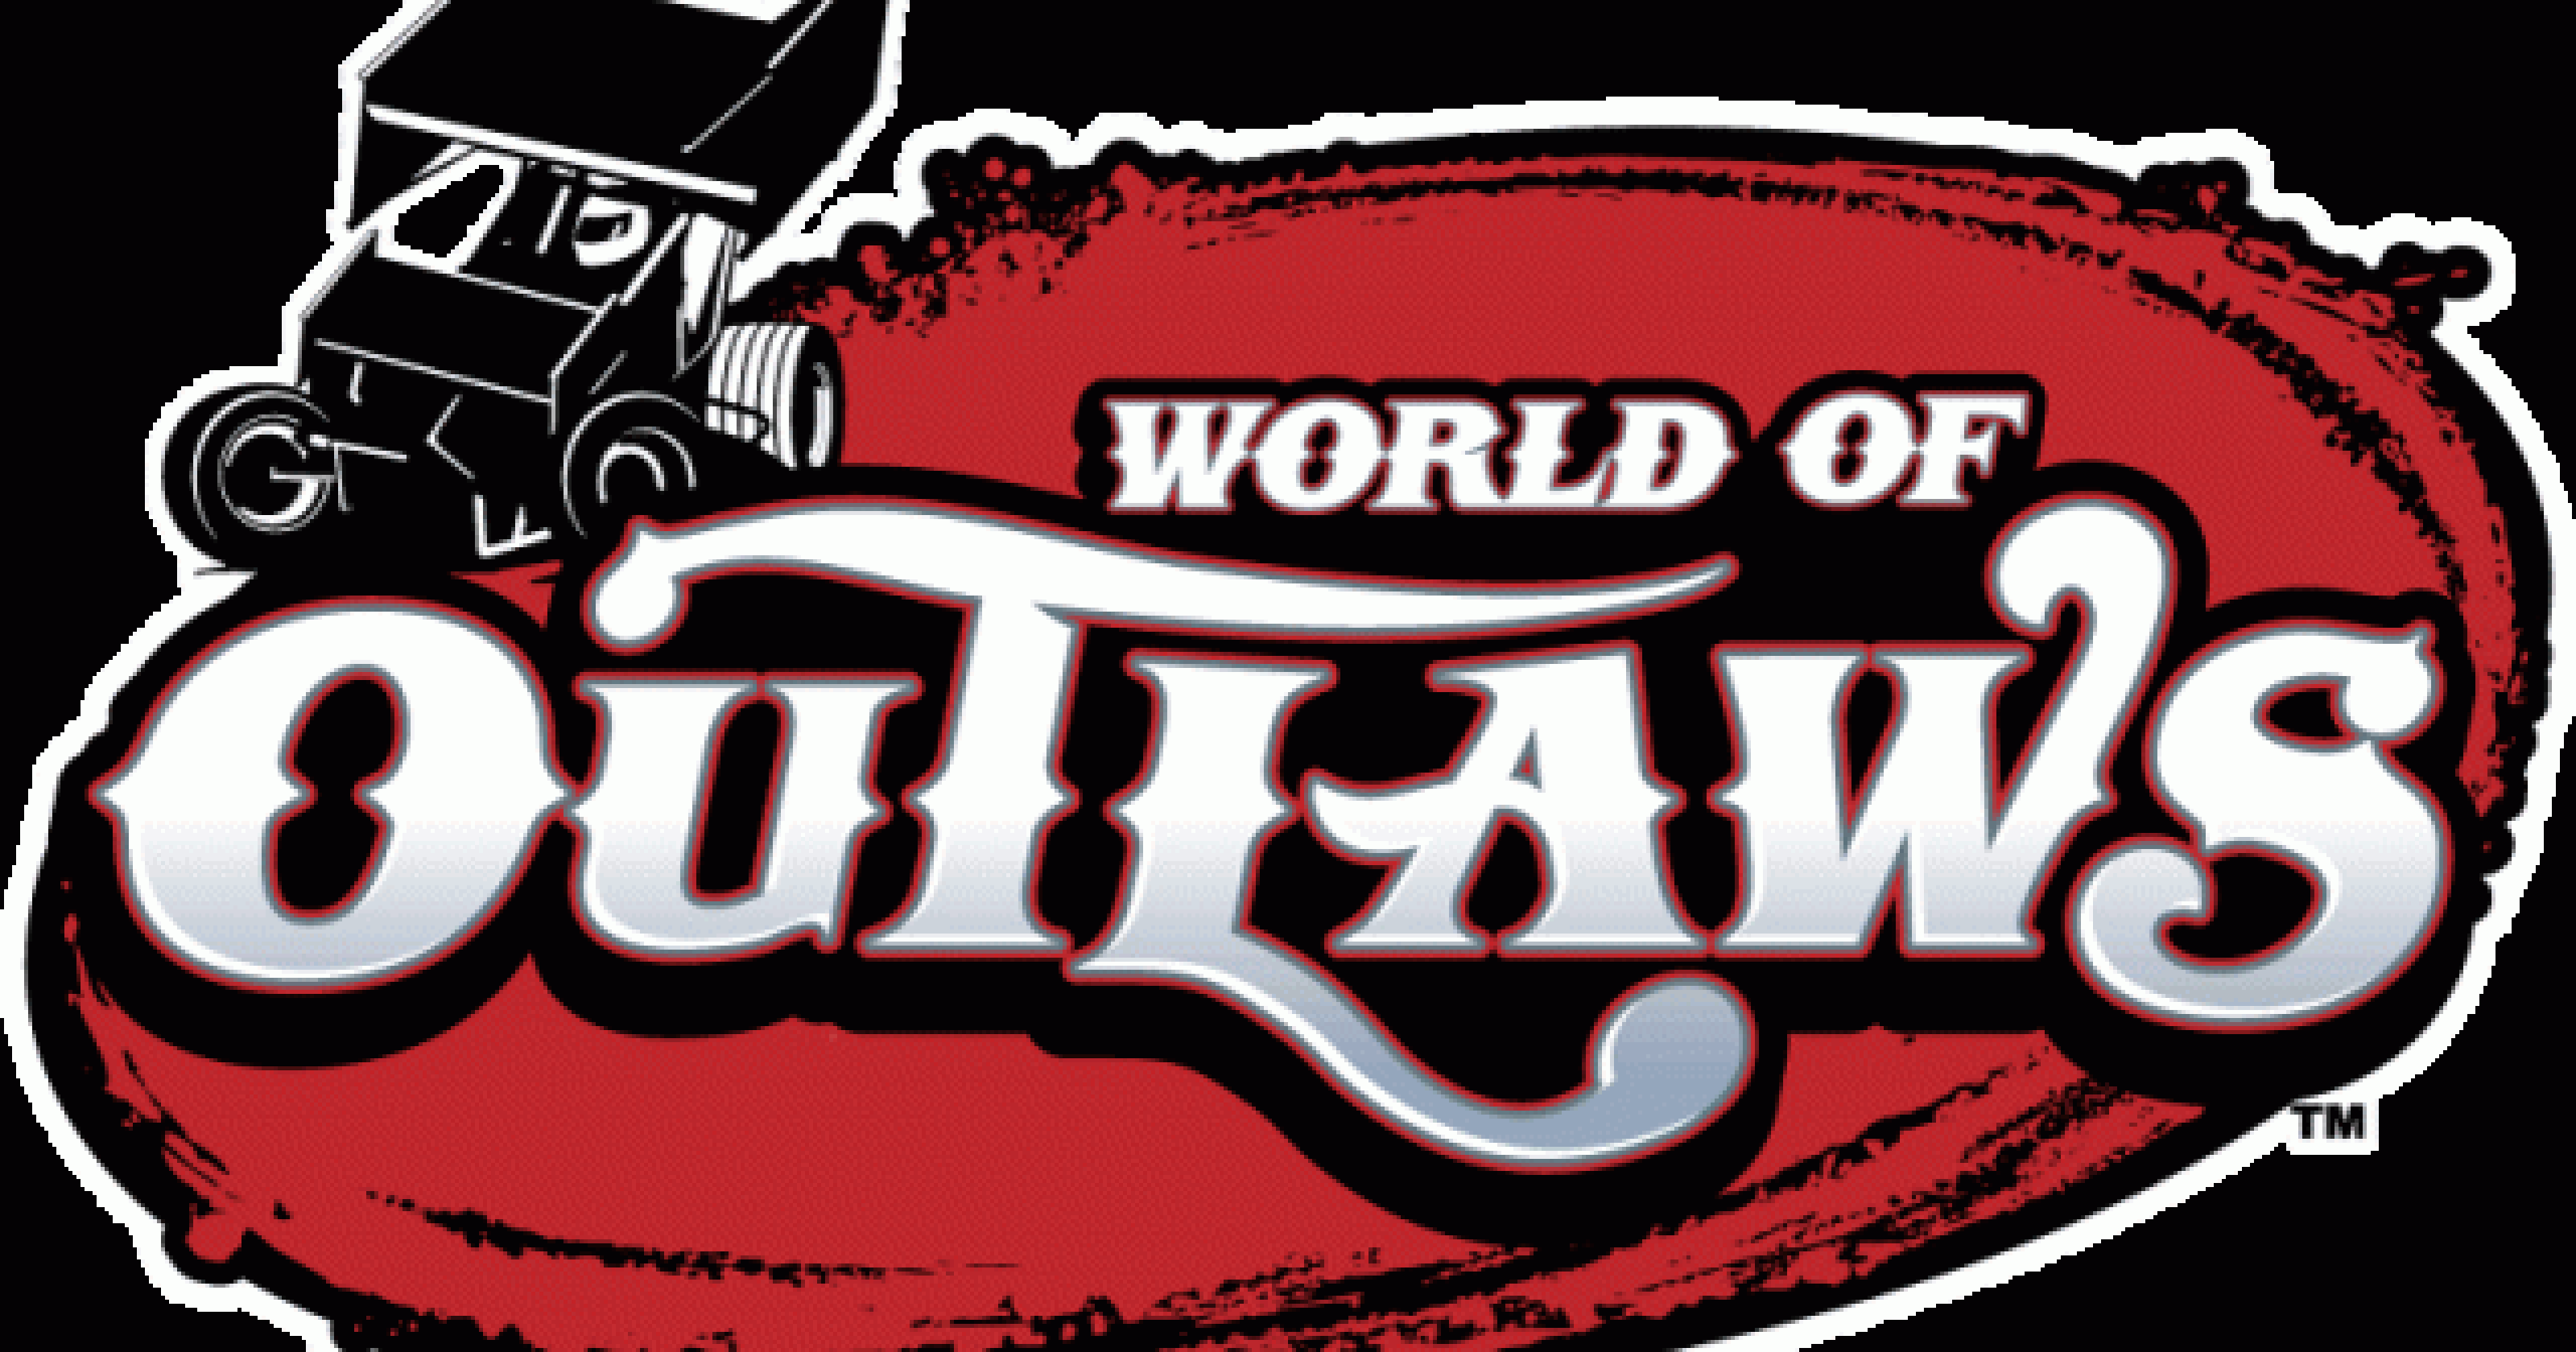 Outlaws Logo - World of Outlaws to invade area this week with stops at Lincoln, Grove